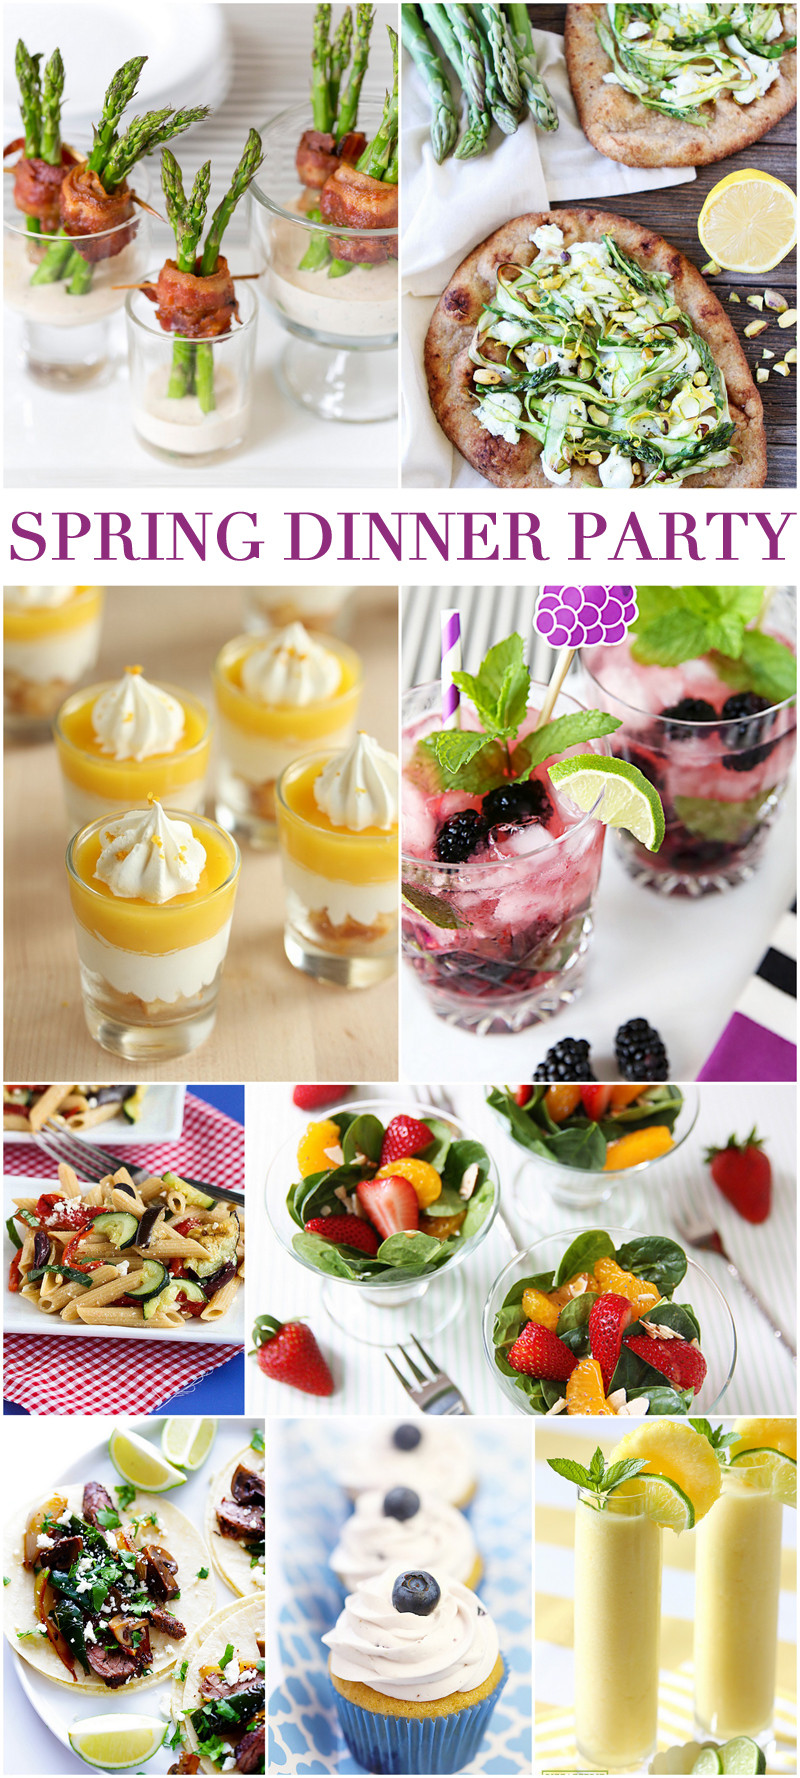 Dinner Party Food Themes Ideas
 Host a Spring Dinner Party in Style